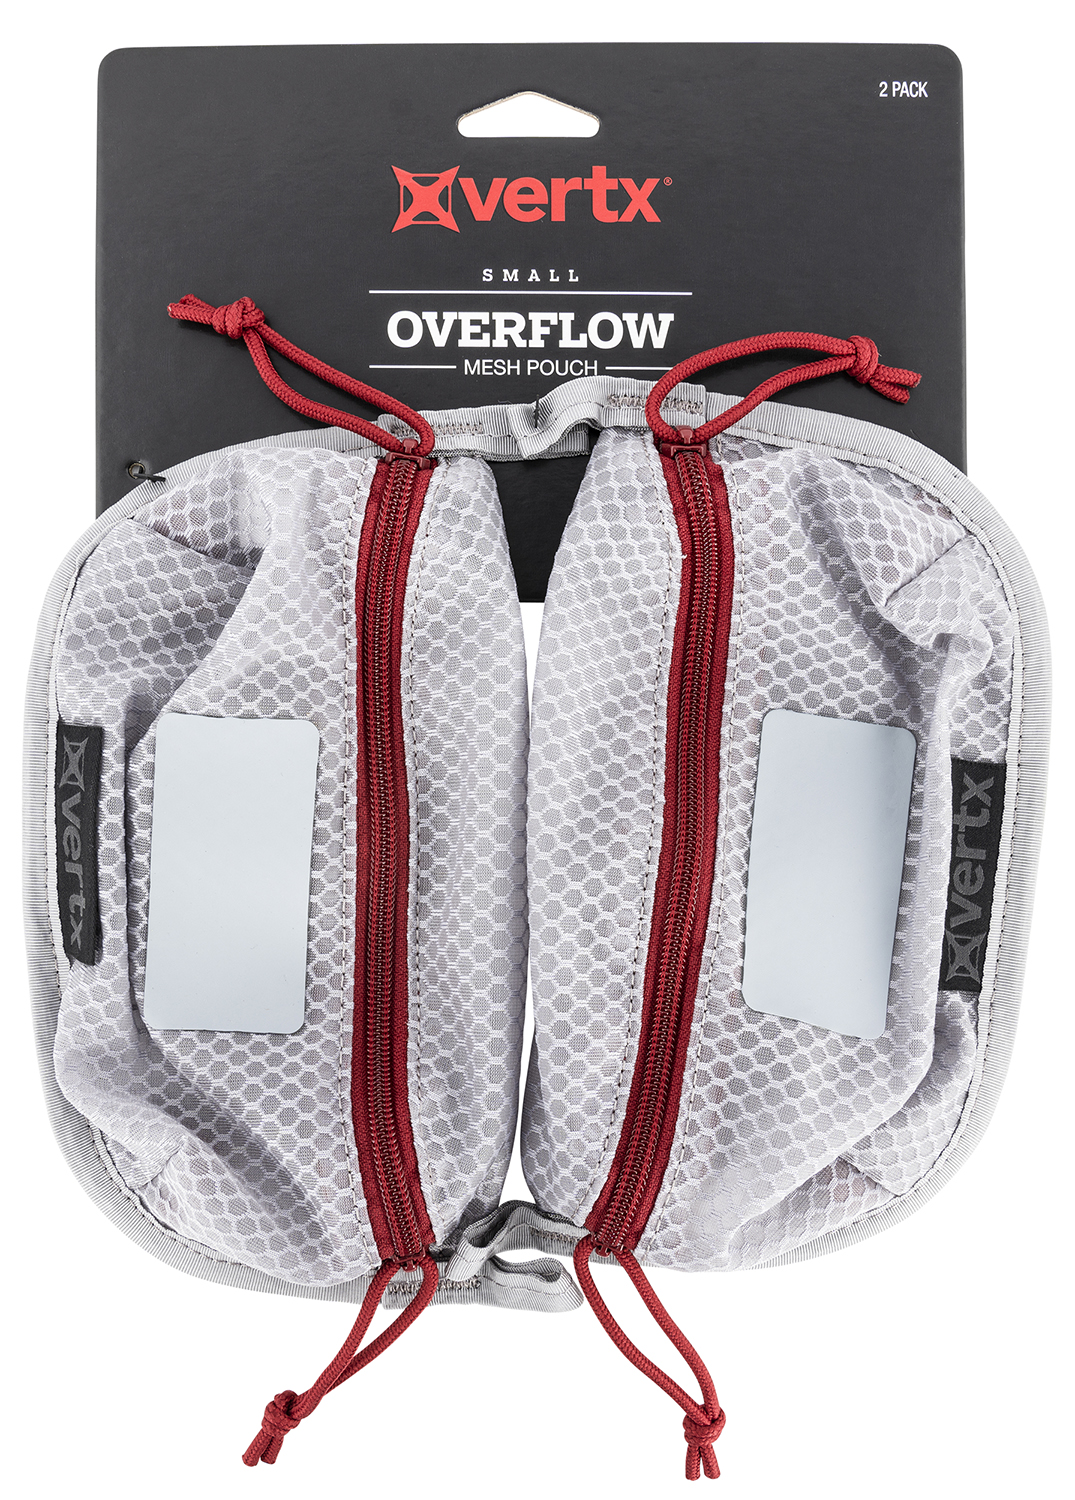 Vertx VTX5195AGYNA Overflow Pouch Small Size made of White Nylon with Mesh & Red Accents, YKK Zipper & Durable Hook Back Panels 5